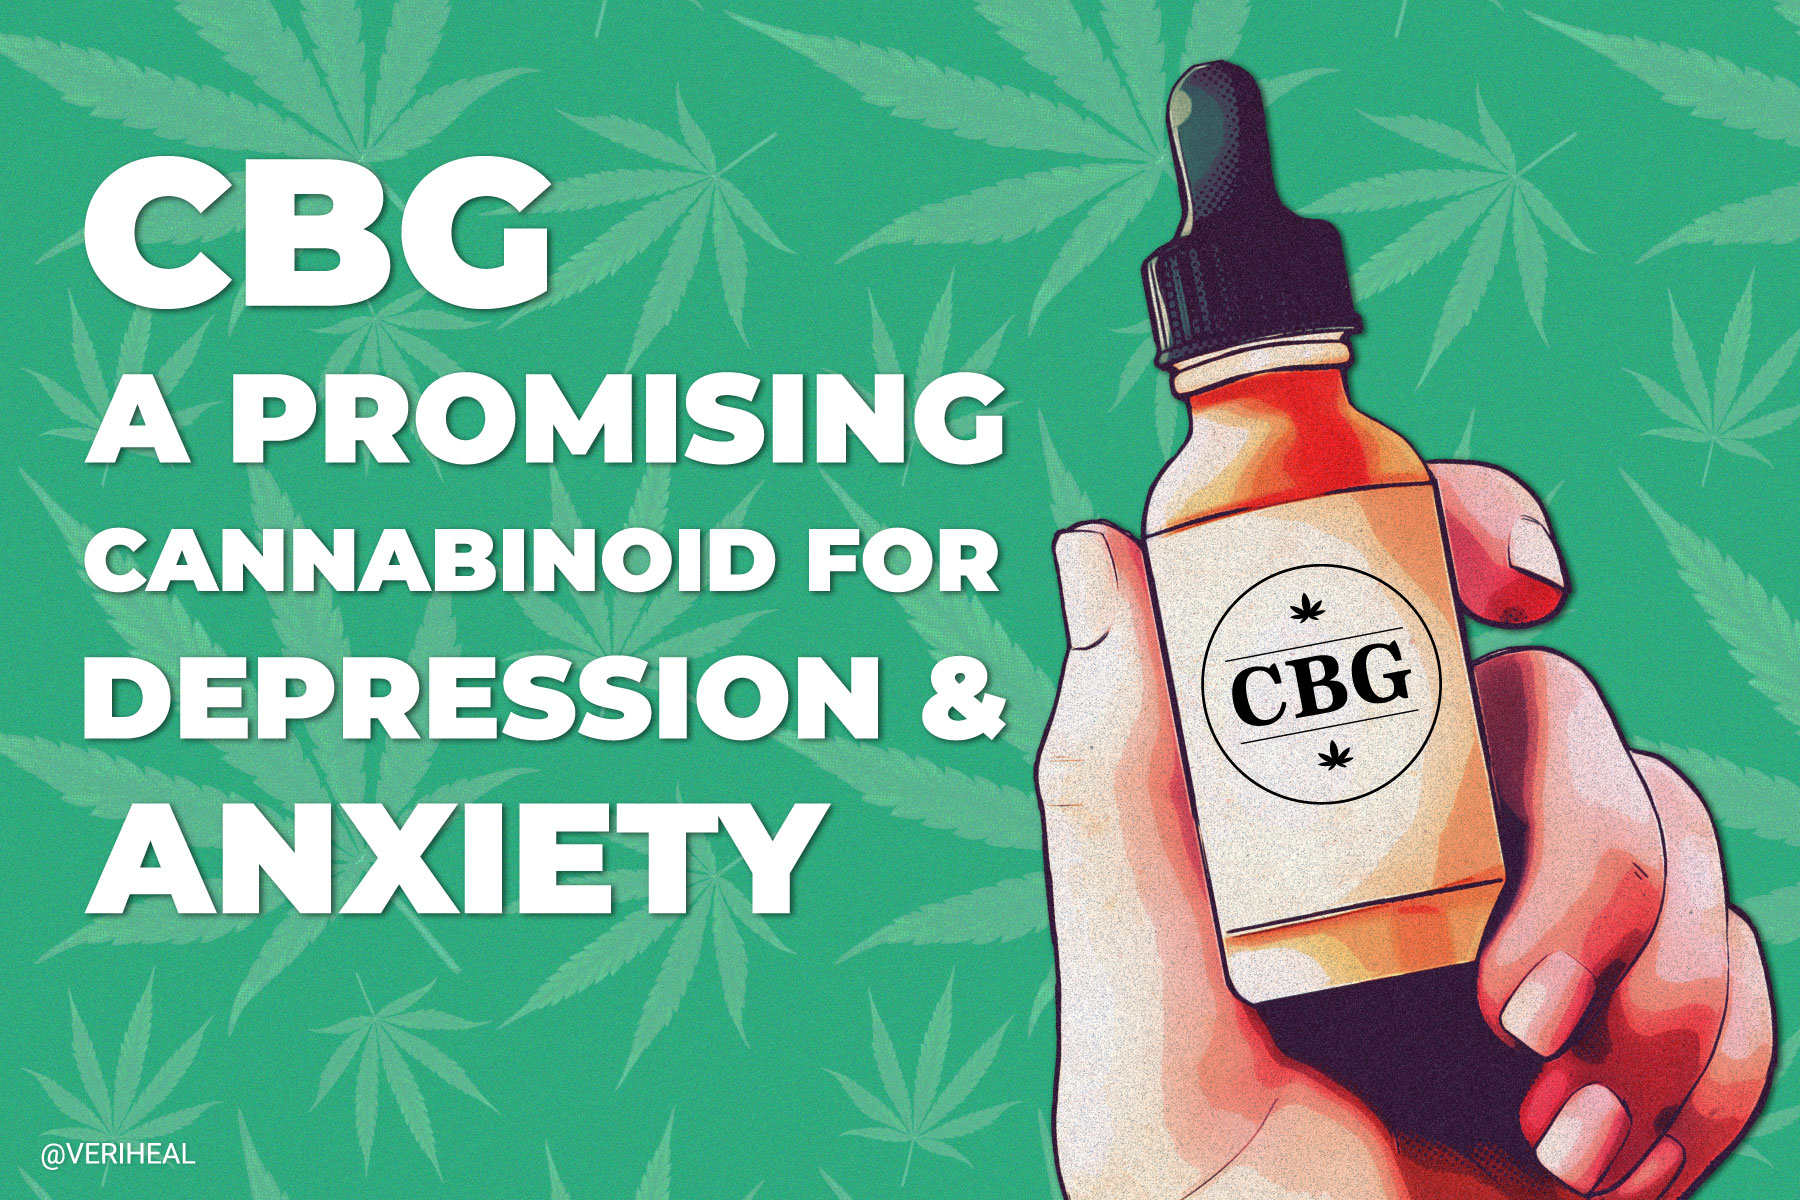 CBG: A Promising Cannabinoid for Depression and Anxiety